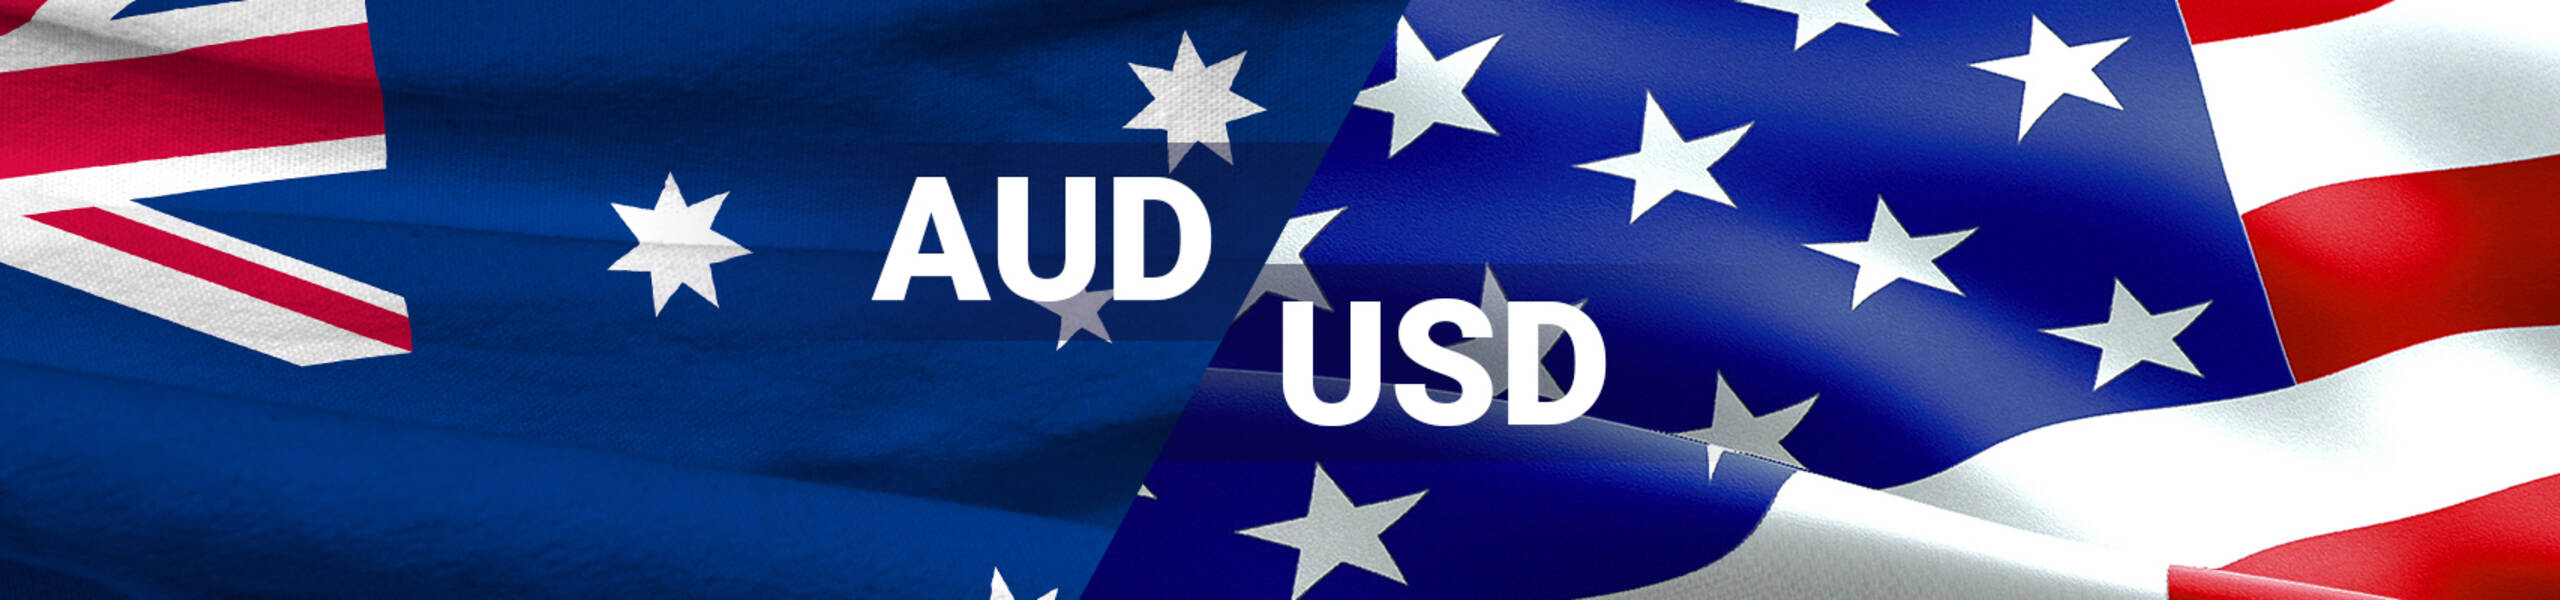 AUD/USD: fighting continues